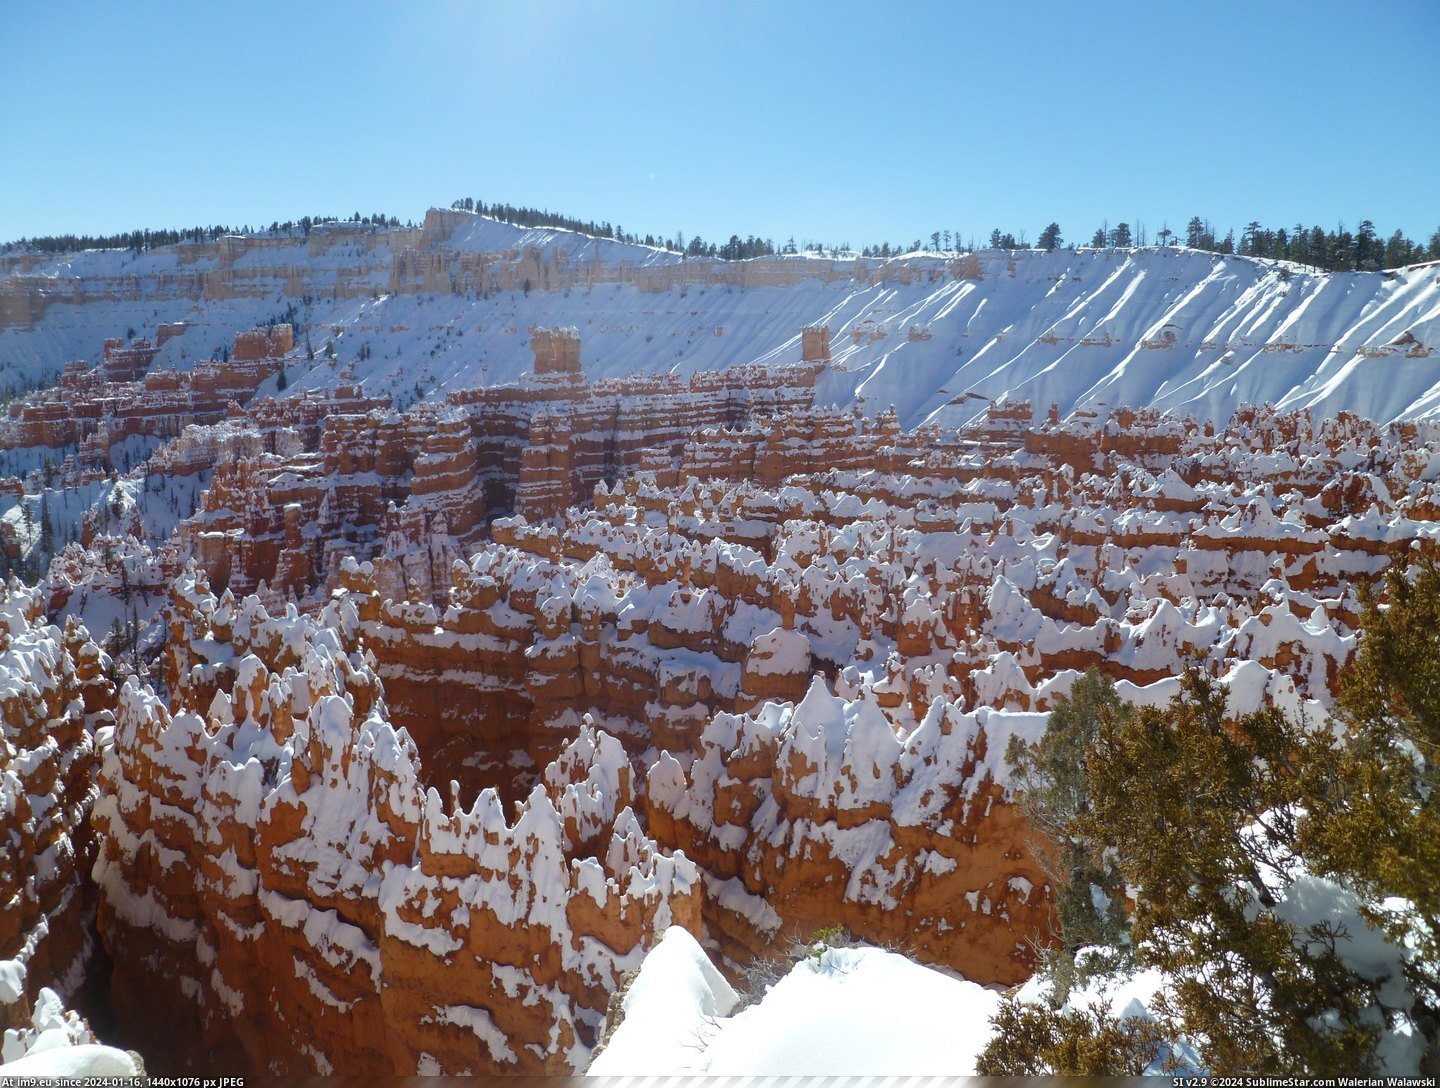 #Park #National #Utah #4320x3240 #Bryce #Snow #Canyon [Earthporn] Bryce Canyon National Park, Utah, dusted in snow [4320x3240] Pic. (Image of album My r/EARTHPORN favs))